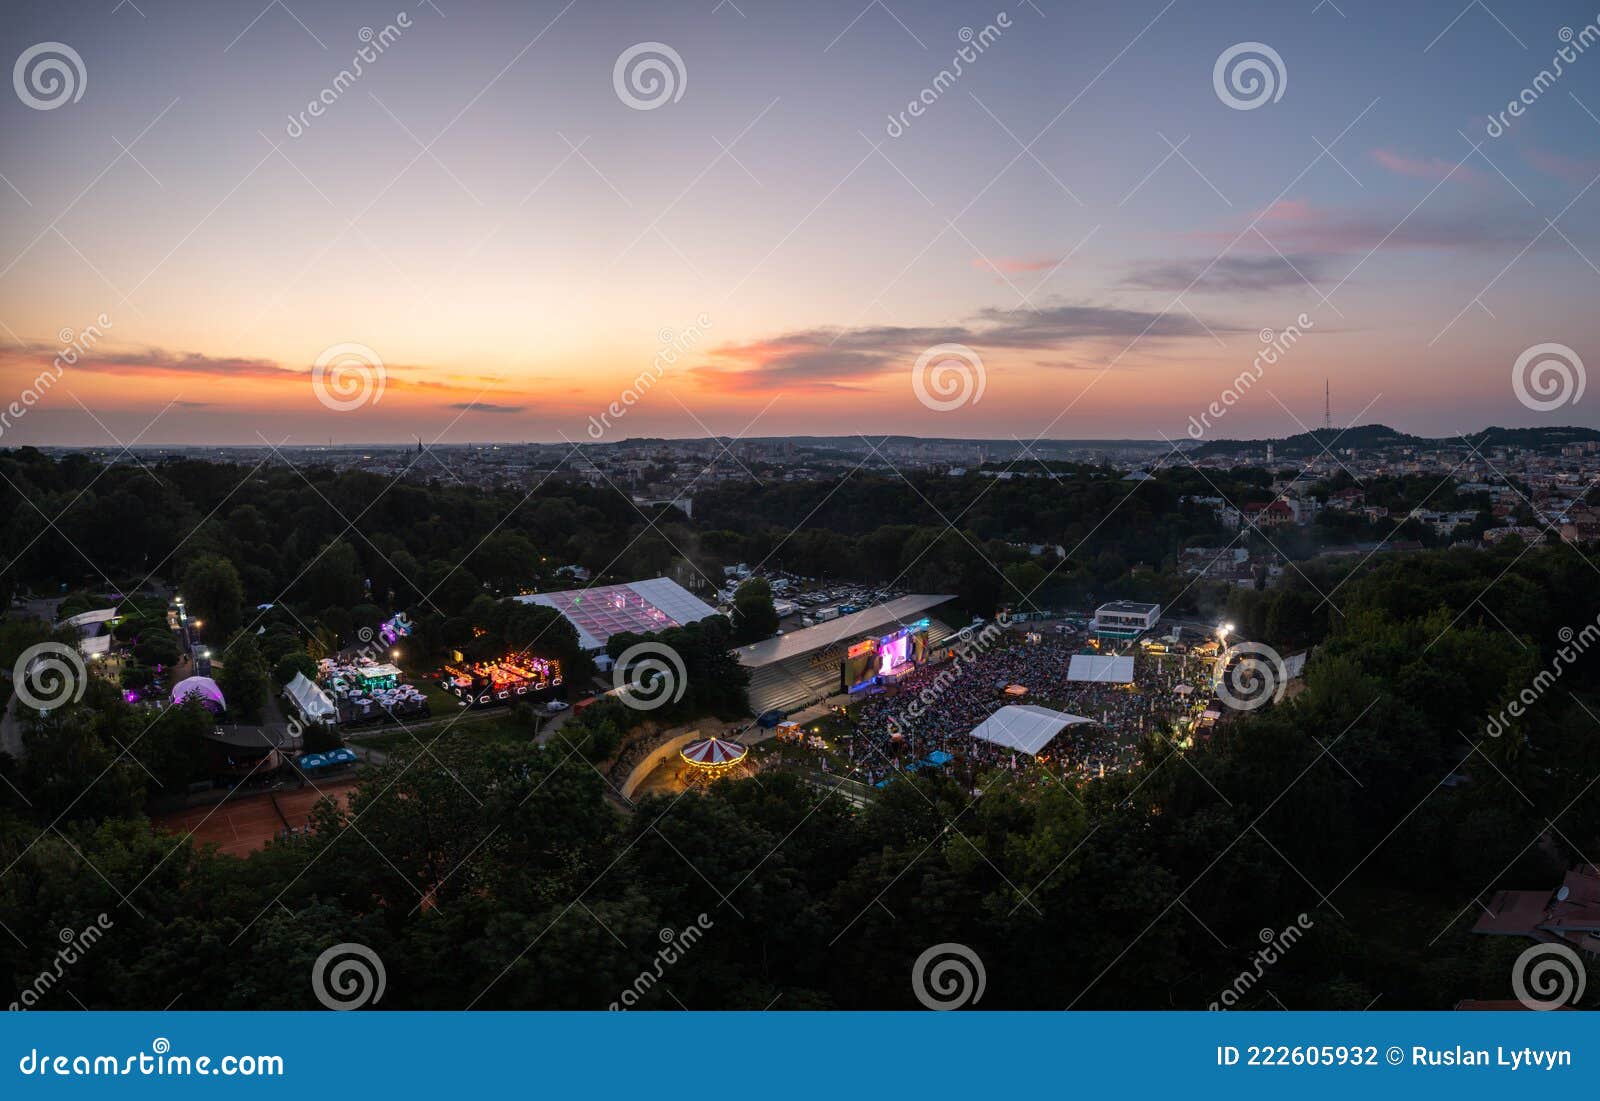 leopolis jazz fest 2021. stage dedicated to eddie rosner. picnic zone. aerial view from drone